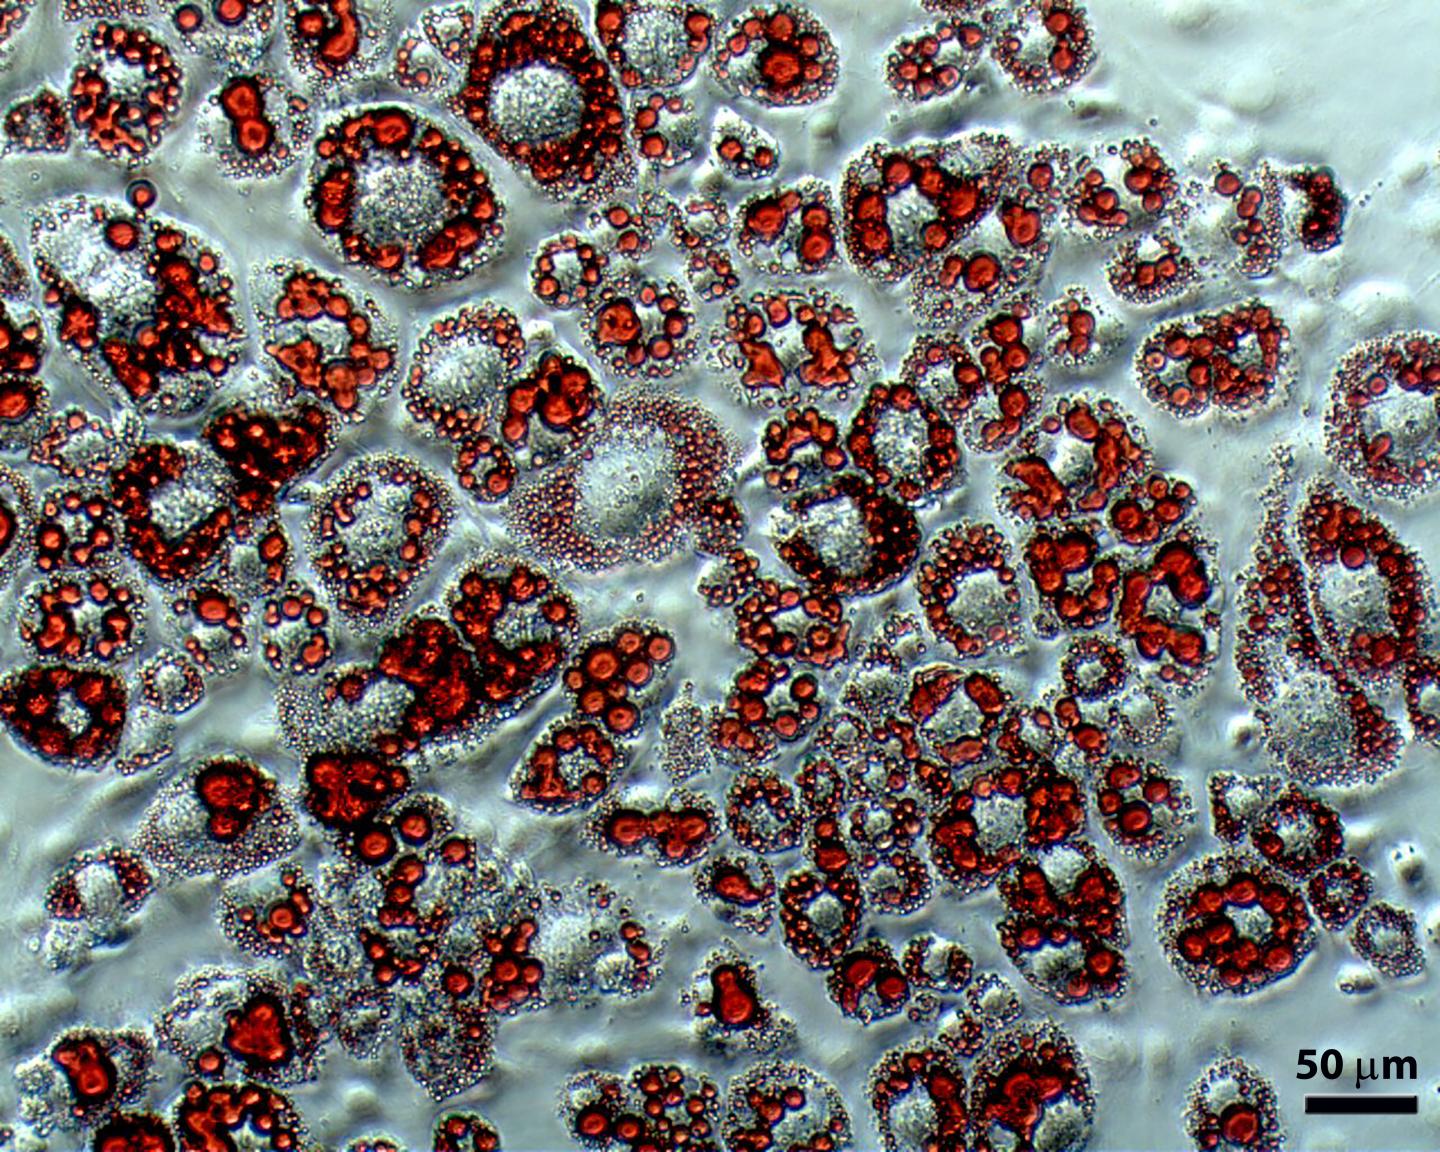 Microscopy Image Depicting Fat Cells (or Adipocytes) After Differentiation